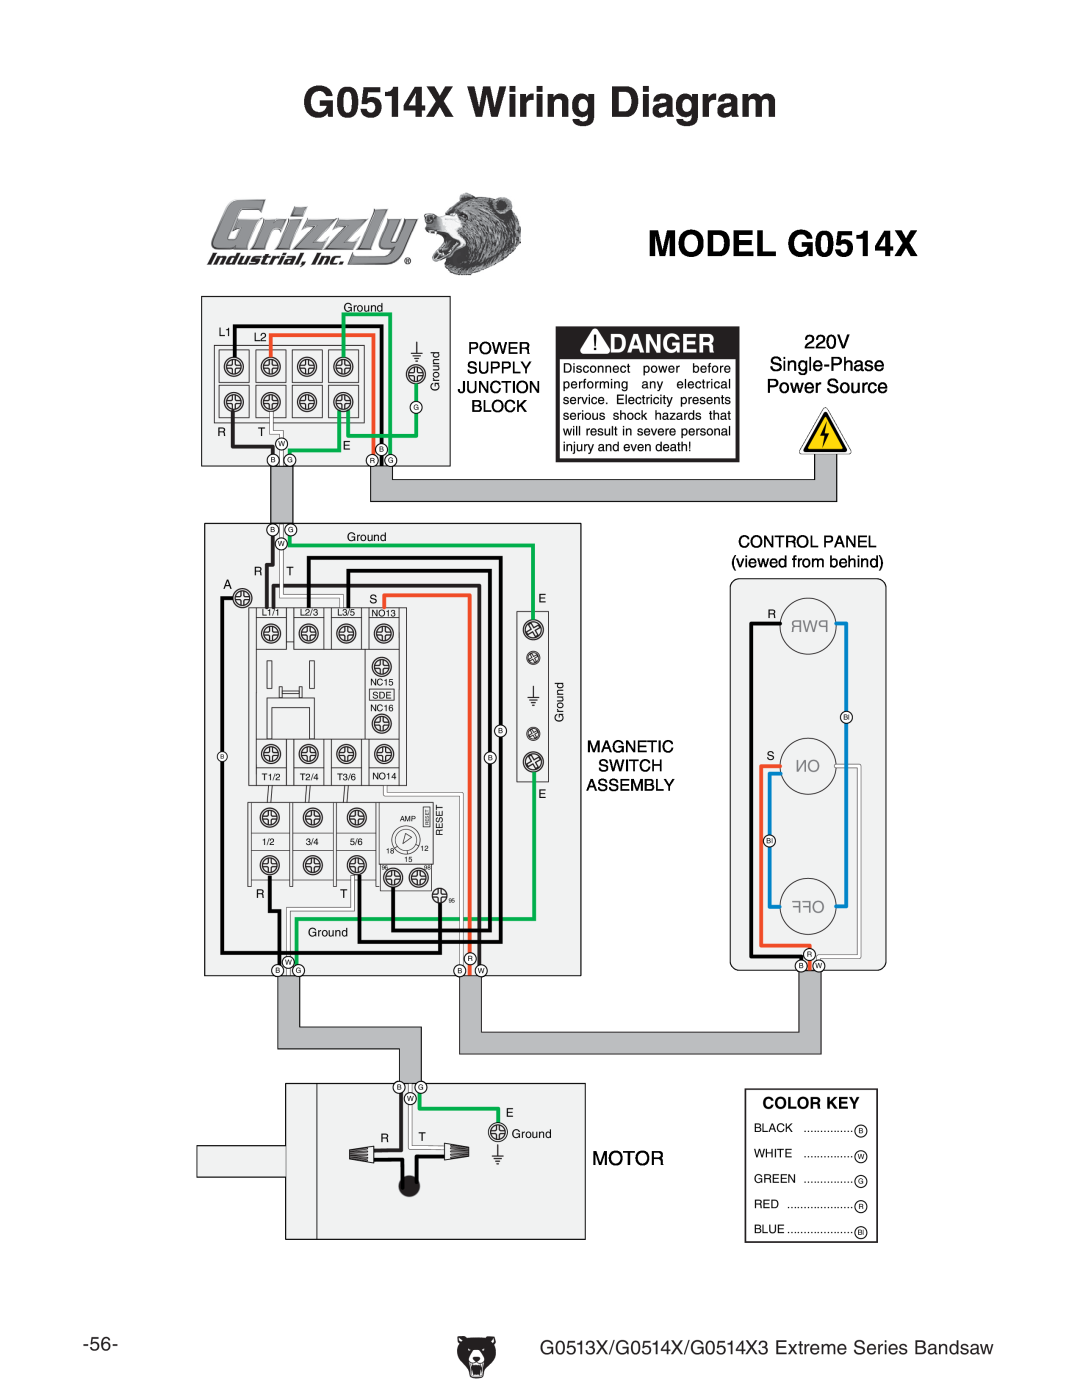 Grizzly owner manual G0514X Wiring Diagram, G0513X/G0514X/G0514X3 Extreme Series Bandsaw 